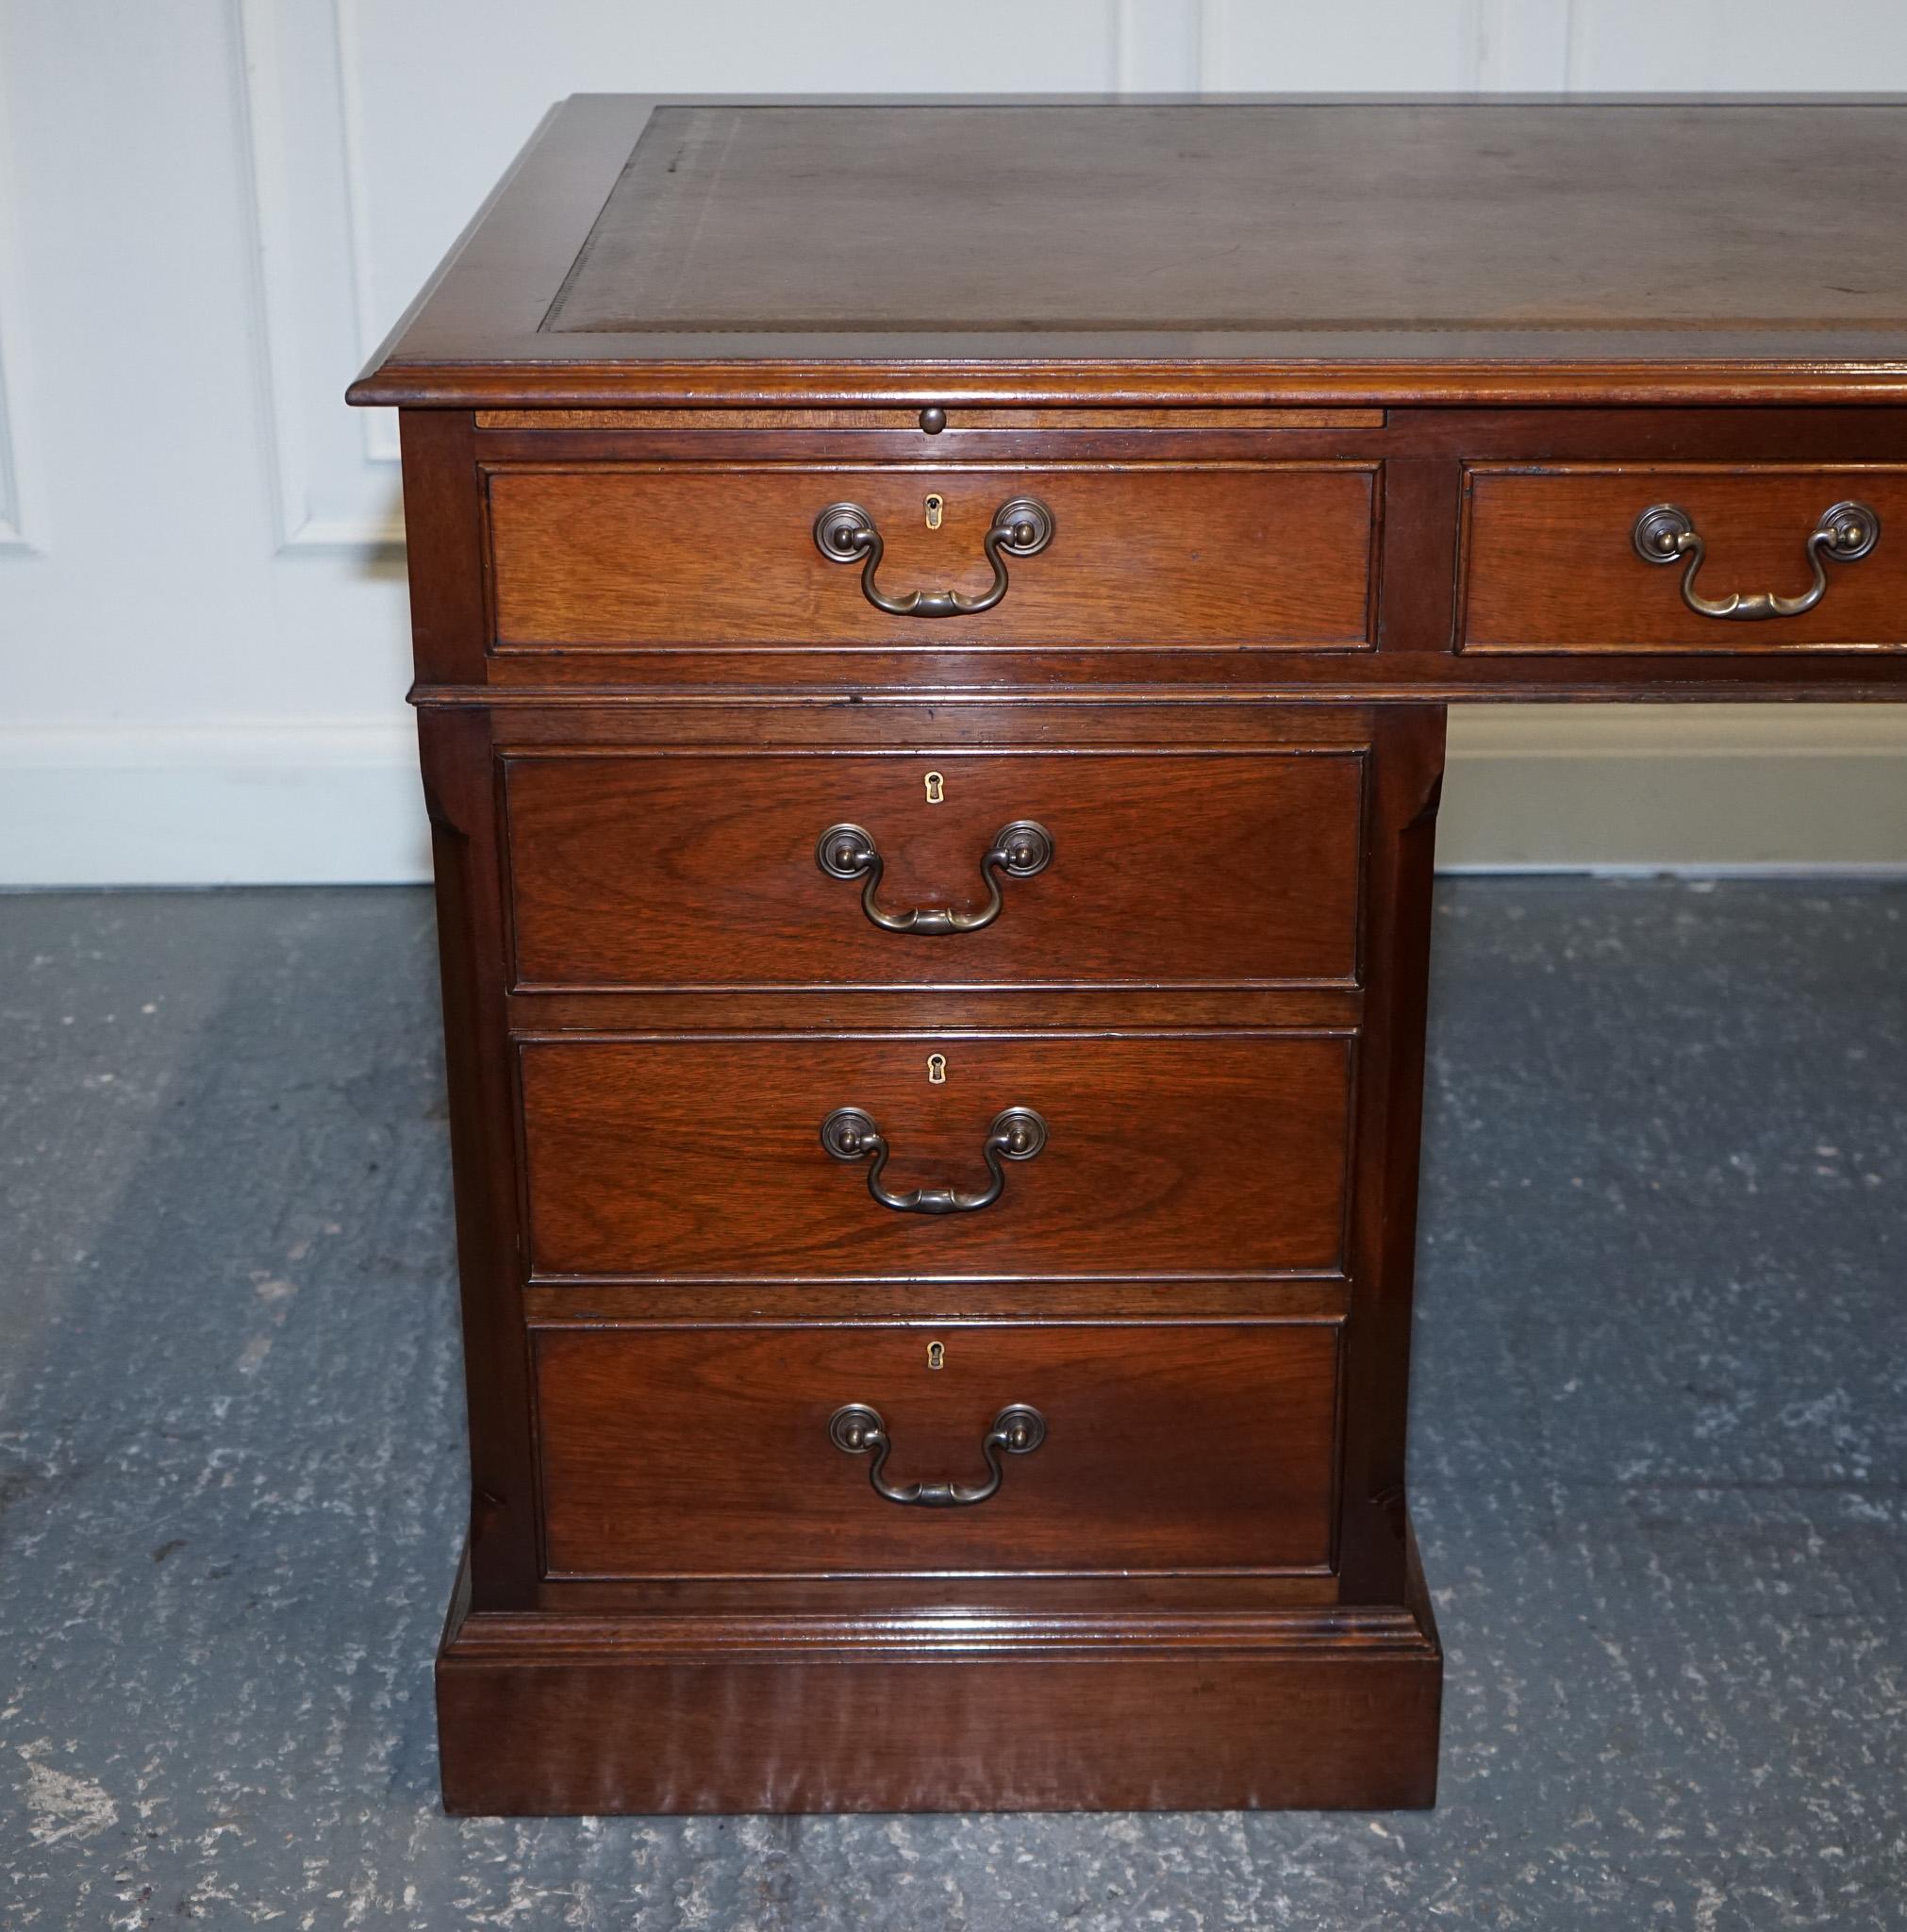 STUNNING LARGE TWiN PEDESTAL DESK BROWN LEATHER TOP SLIDING OUT TRAYS 8 DRAWERS For Sale 2